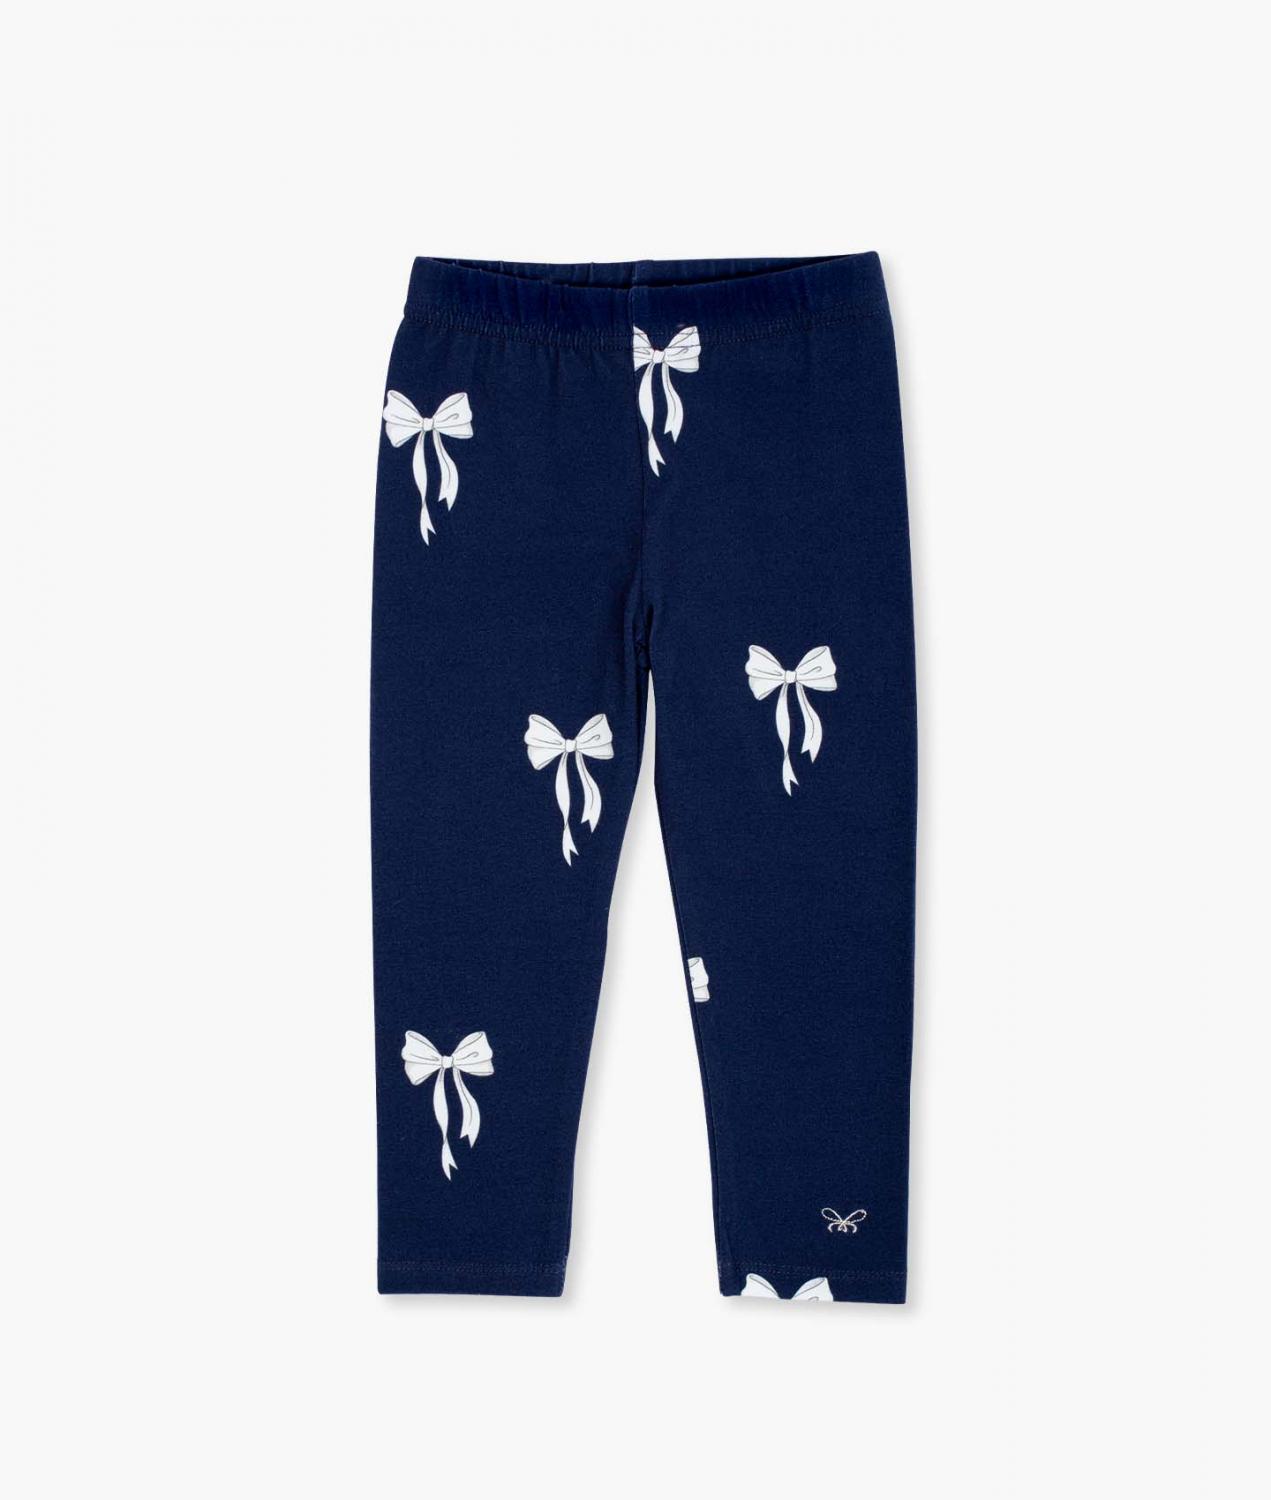 LIVLY ESSENTIAL PANTS BOWS NAVY